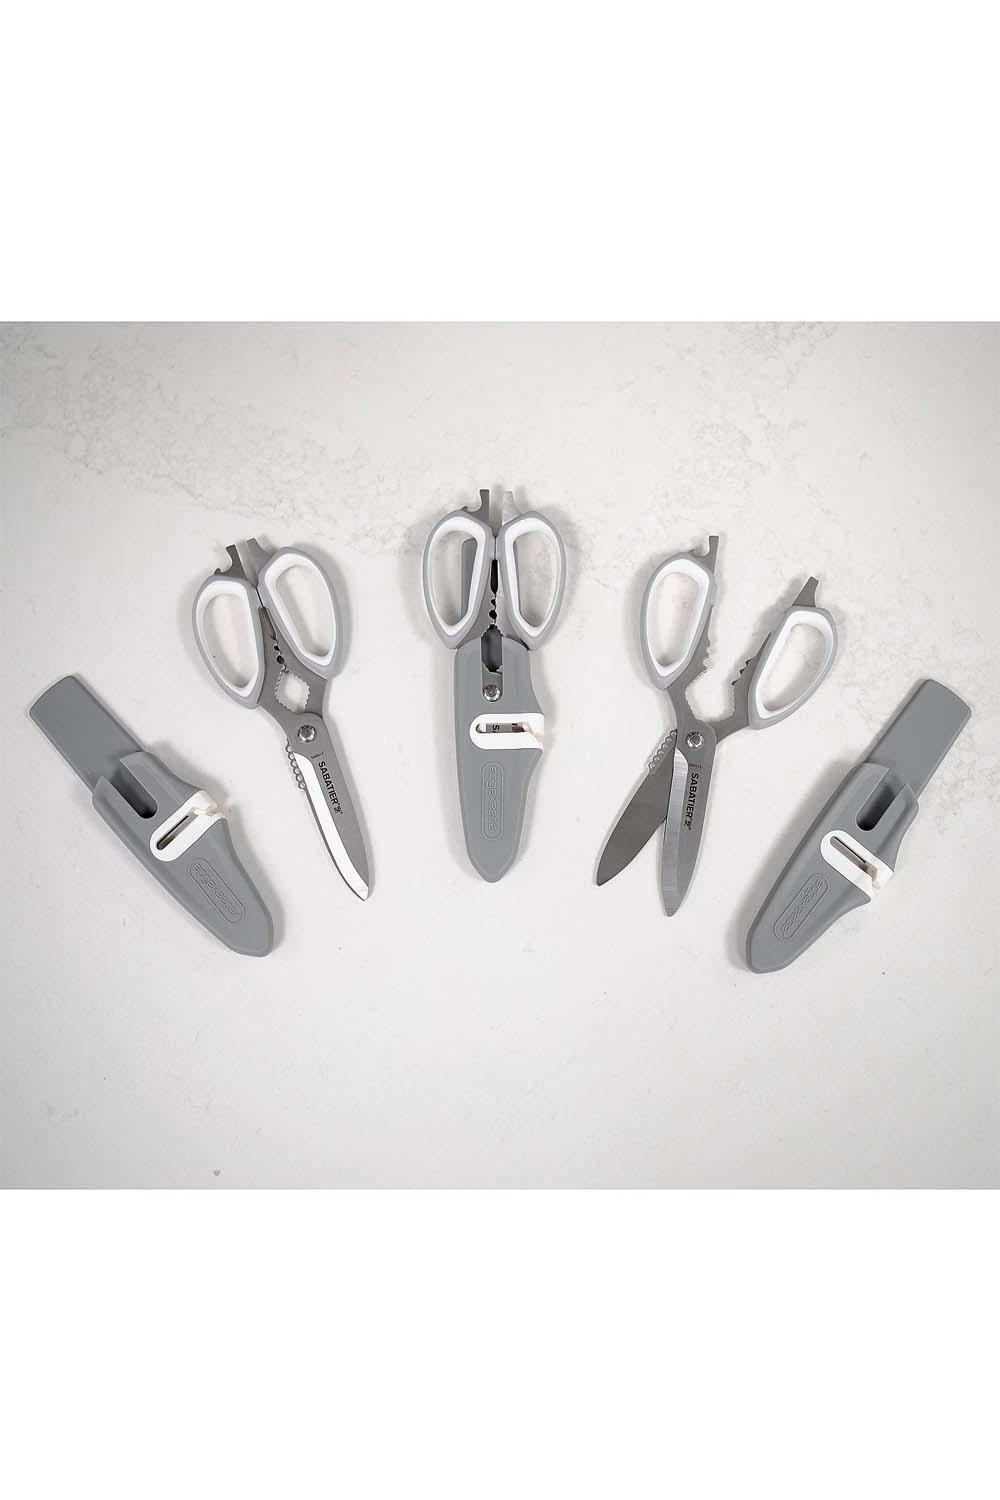 Sabatier 2-in-1 All-Purpose Scissors, Gift Wrap Scissors with Removable Tape Dispenser Blade Cover, Ultra-Sharp Stainless Steel Multi-Purpose